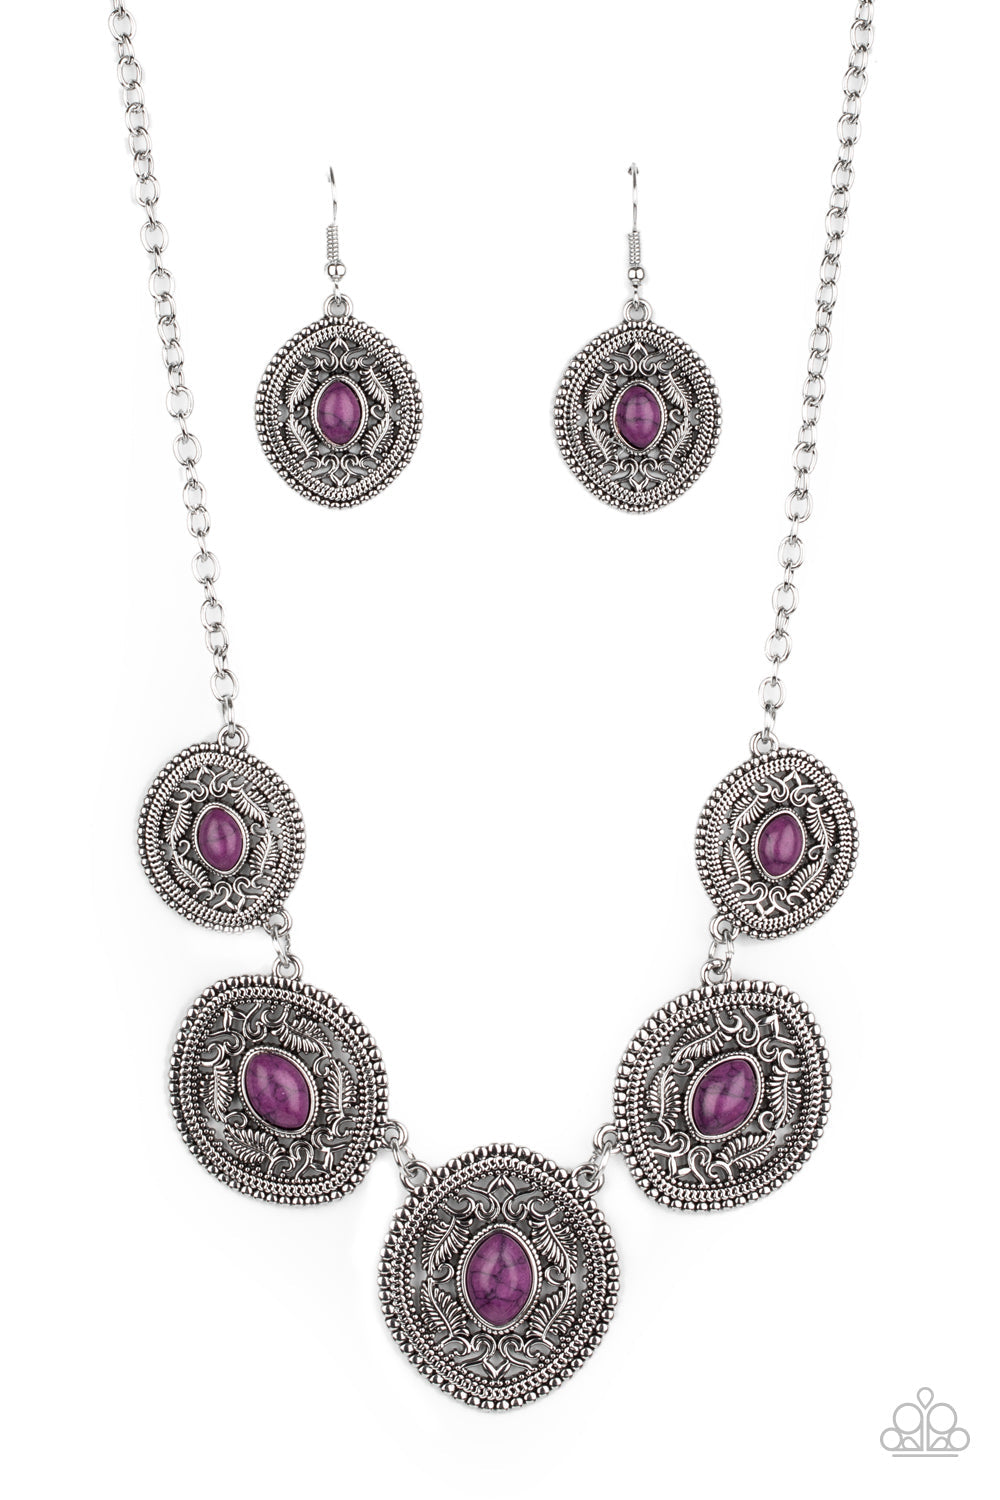 Alter ECO - Purple and Silver Necklace - Paparazzi Accessories - Dainty purple stones dot the centers of leafy silver filigree filled frames that delicately connect below the collar, creating a colorfully earthy look. Features an adjustable clasp closure. Trendy fashion jewelry for everyone.